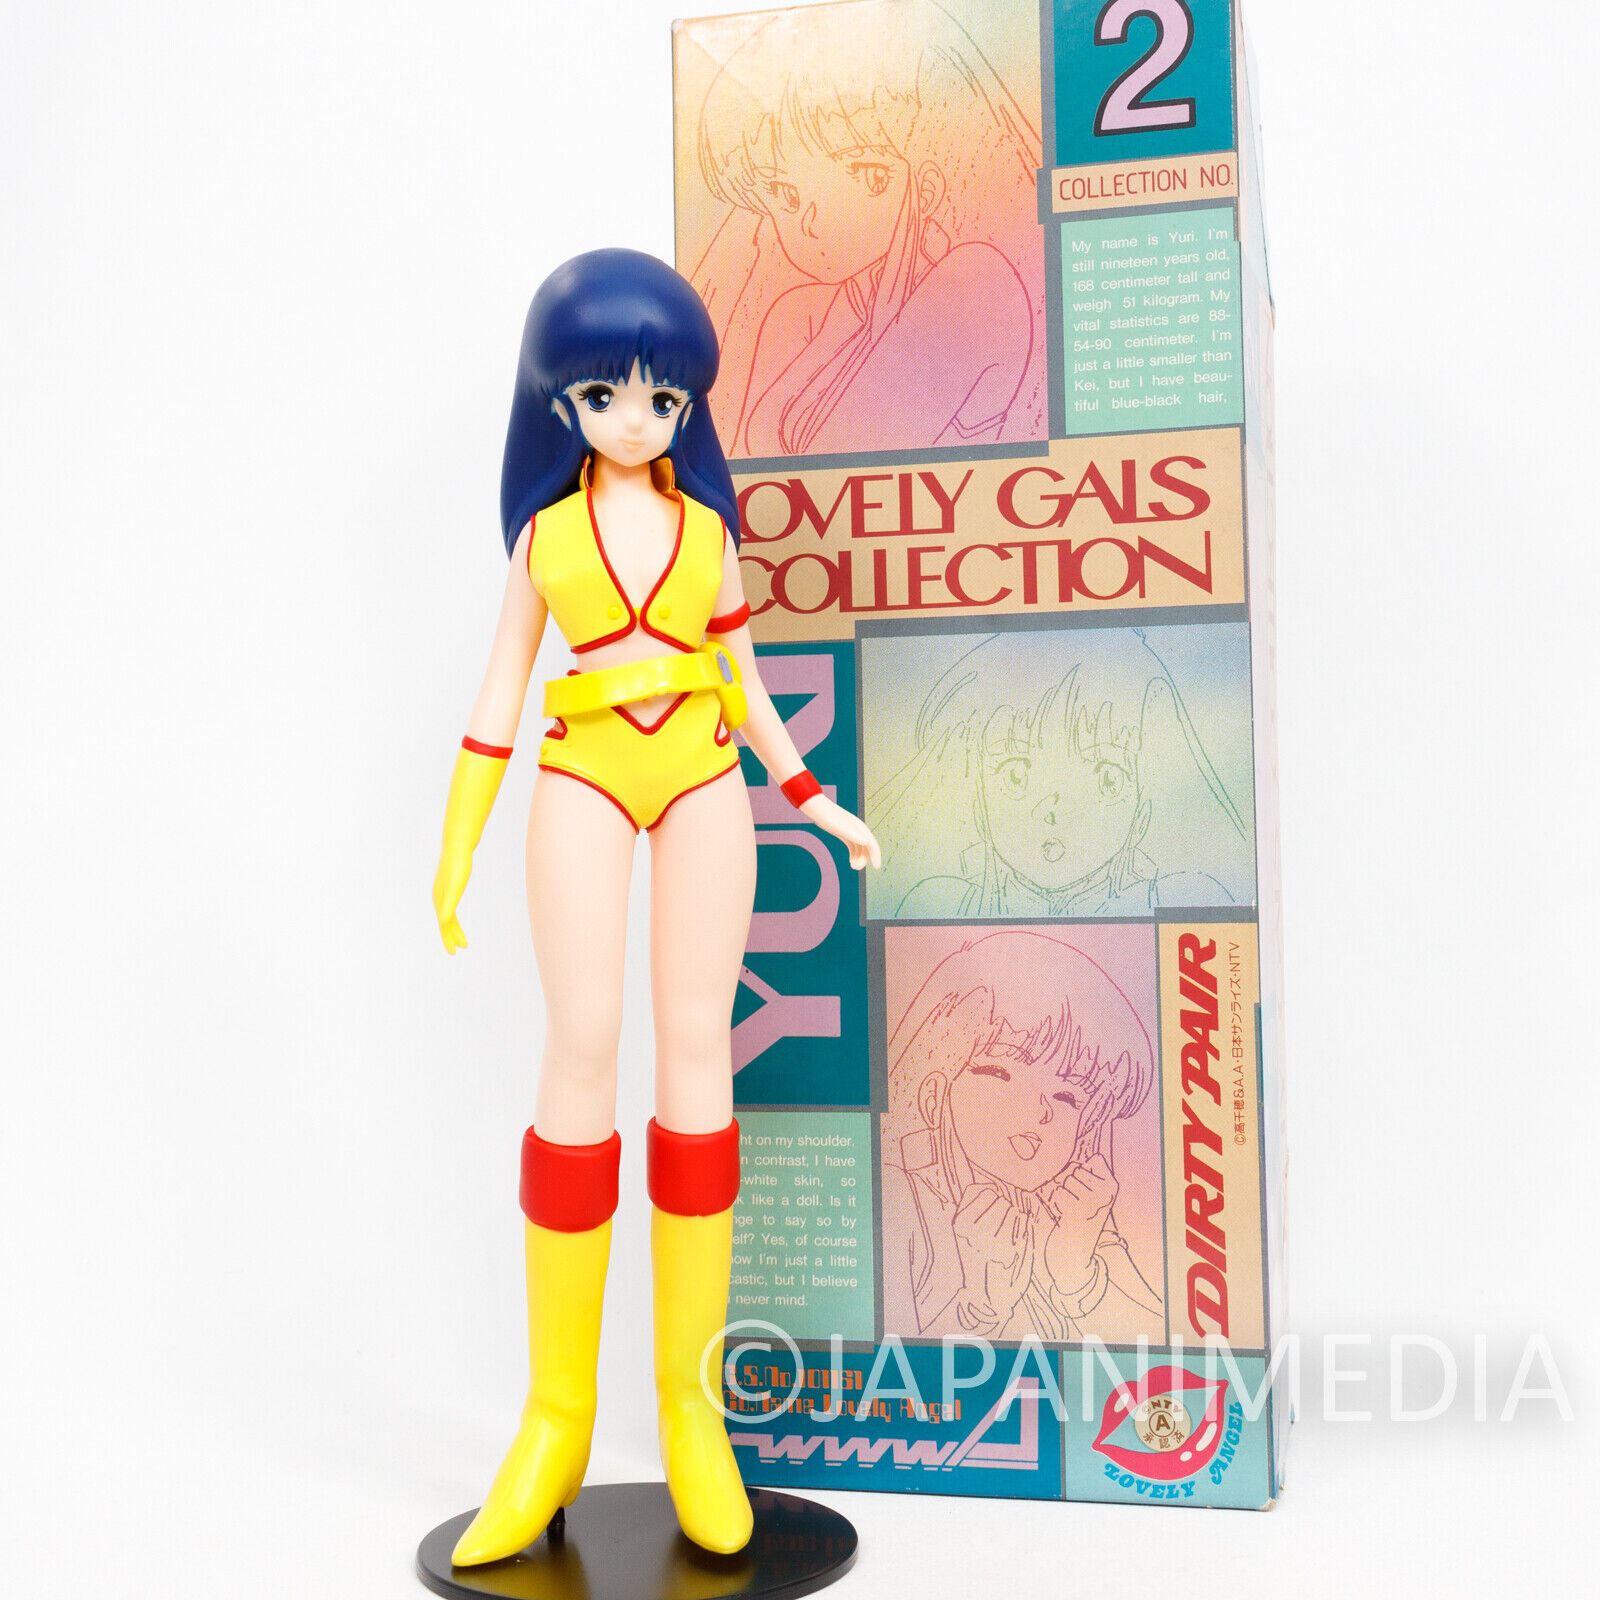 Dirty Pair Yuri Lovery Gals Collection 1/6 Figure Bandai JAPAN ANIME